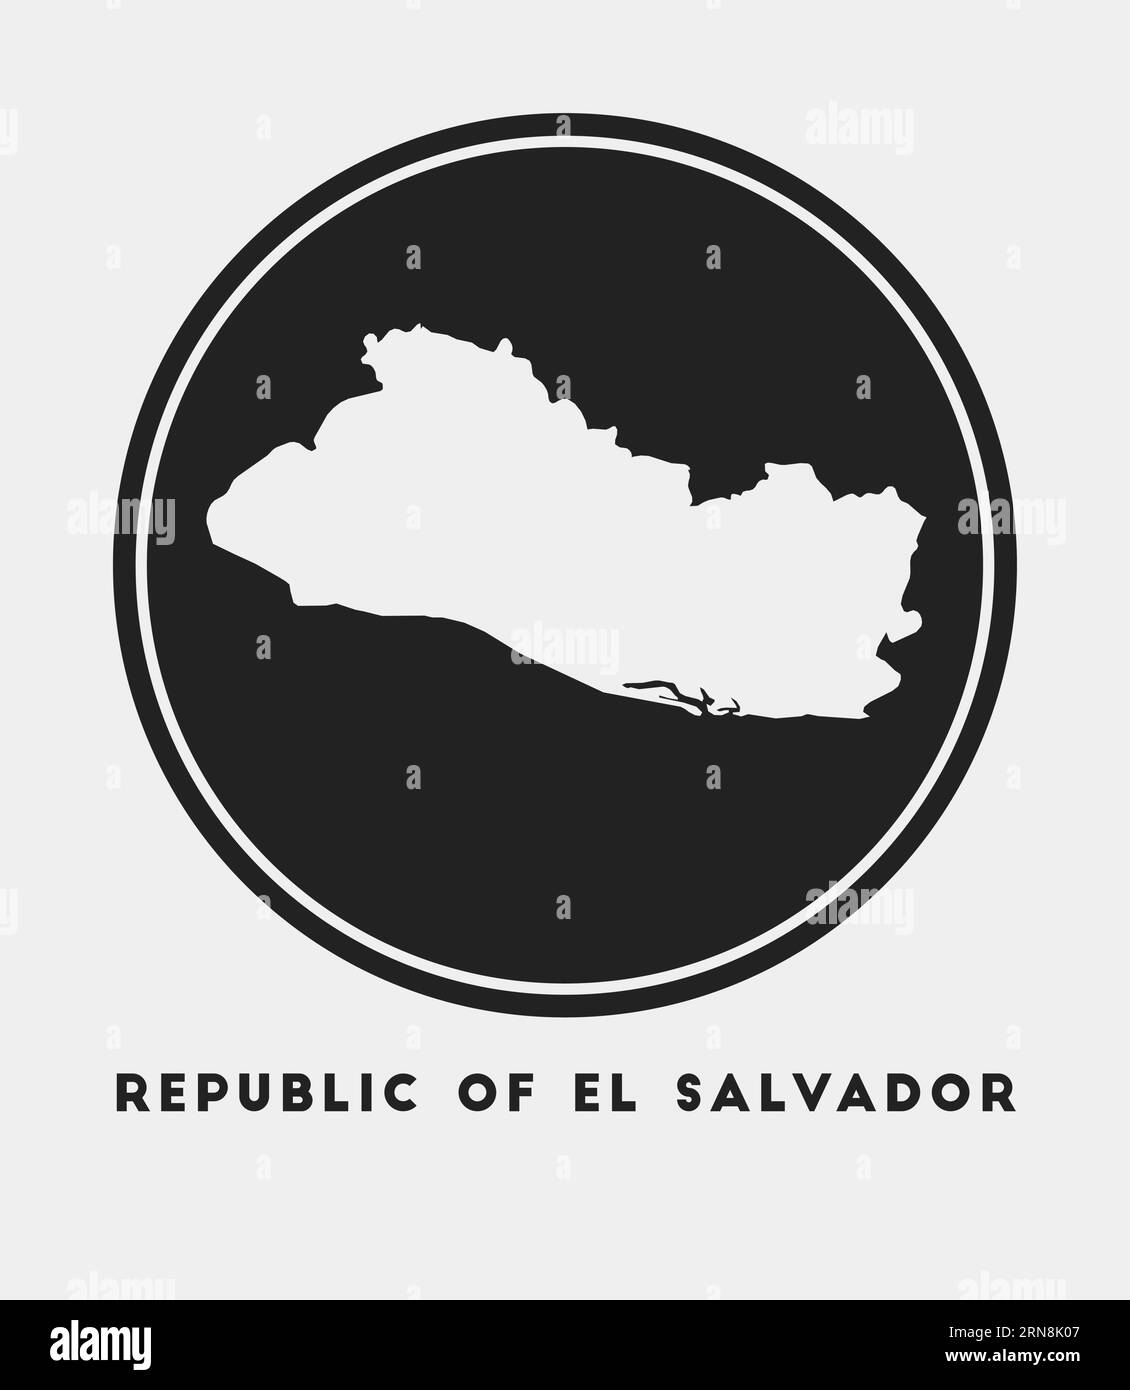 Republic of El Salvador icon. Round logo with country map and title. Stylish Republic of El Salvador badge with map. Vector illustration. Stock Vector